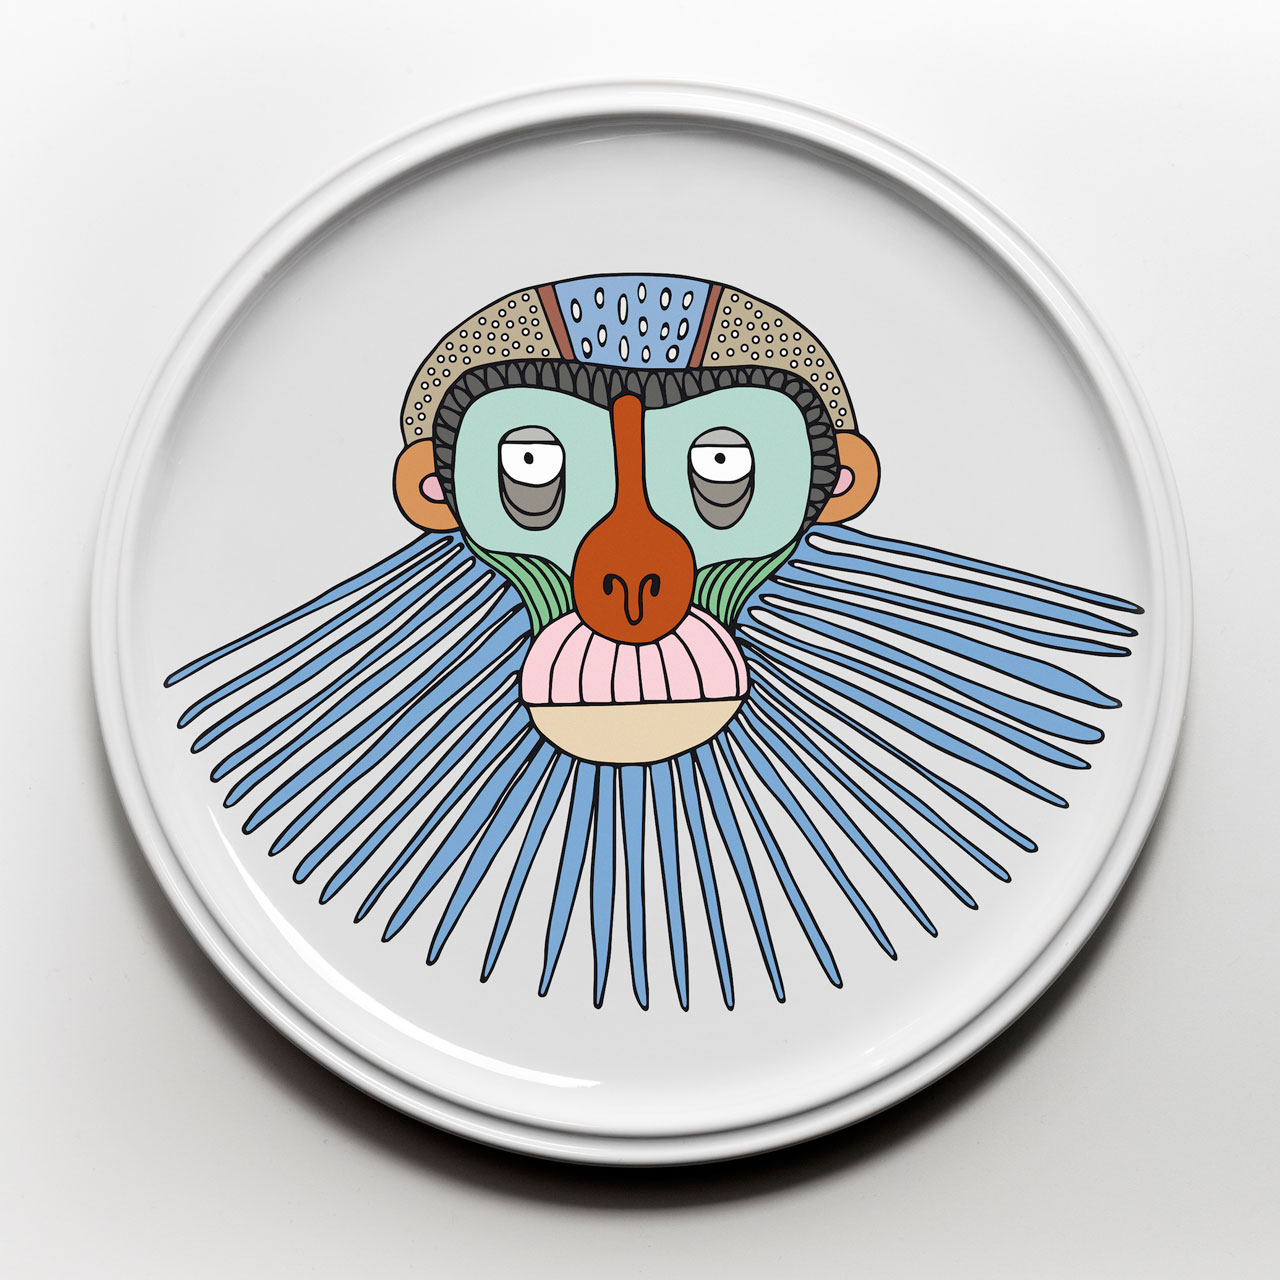 Ceramic plates from the PRIMATES series by Elena Salmistraro for Bosa.